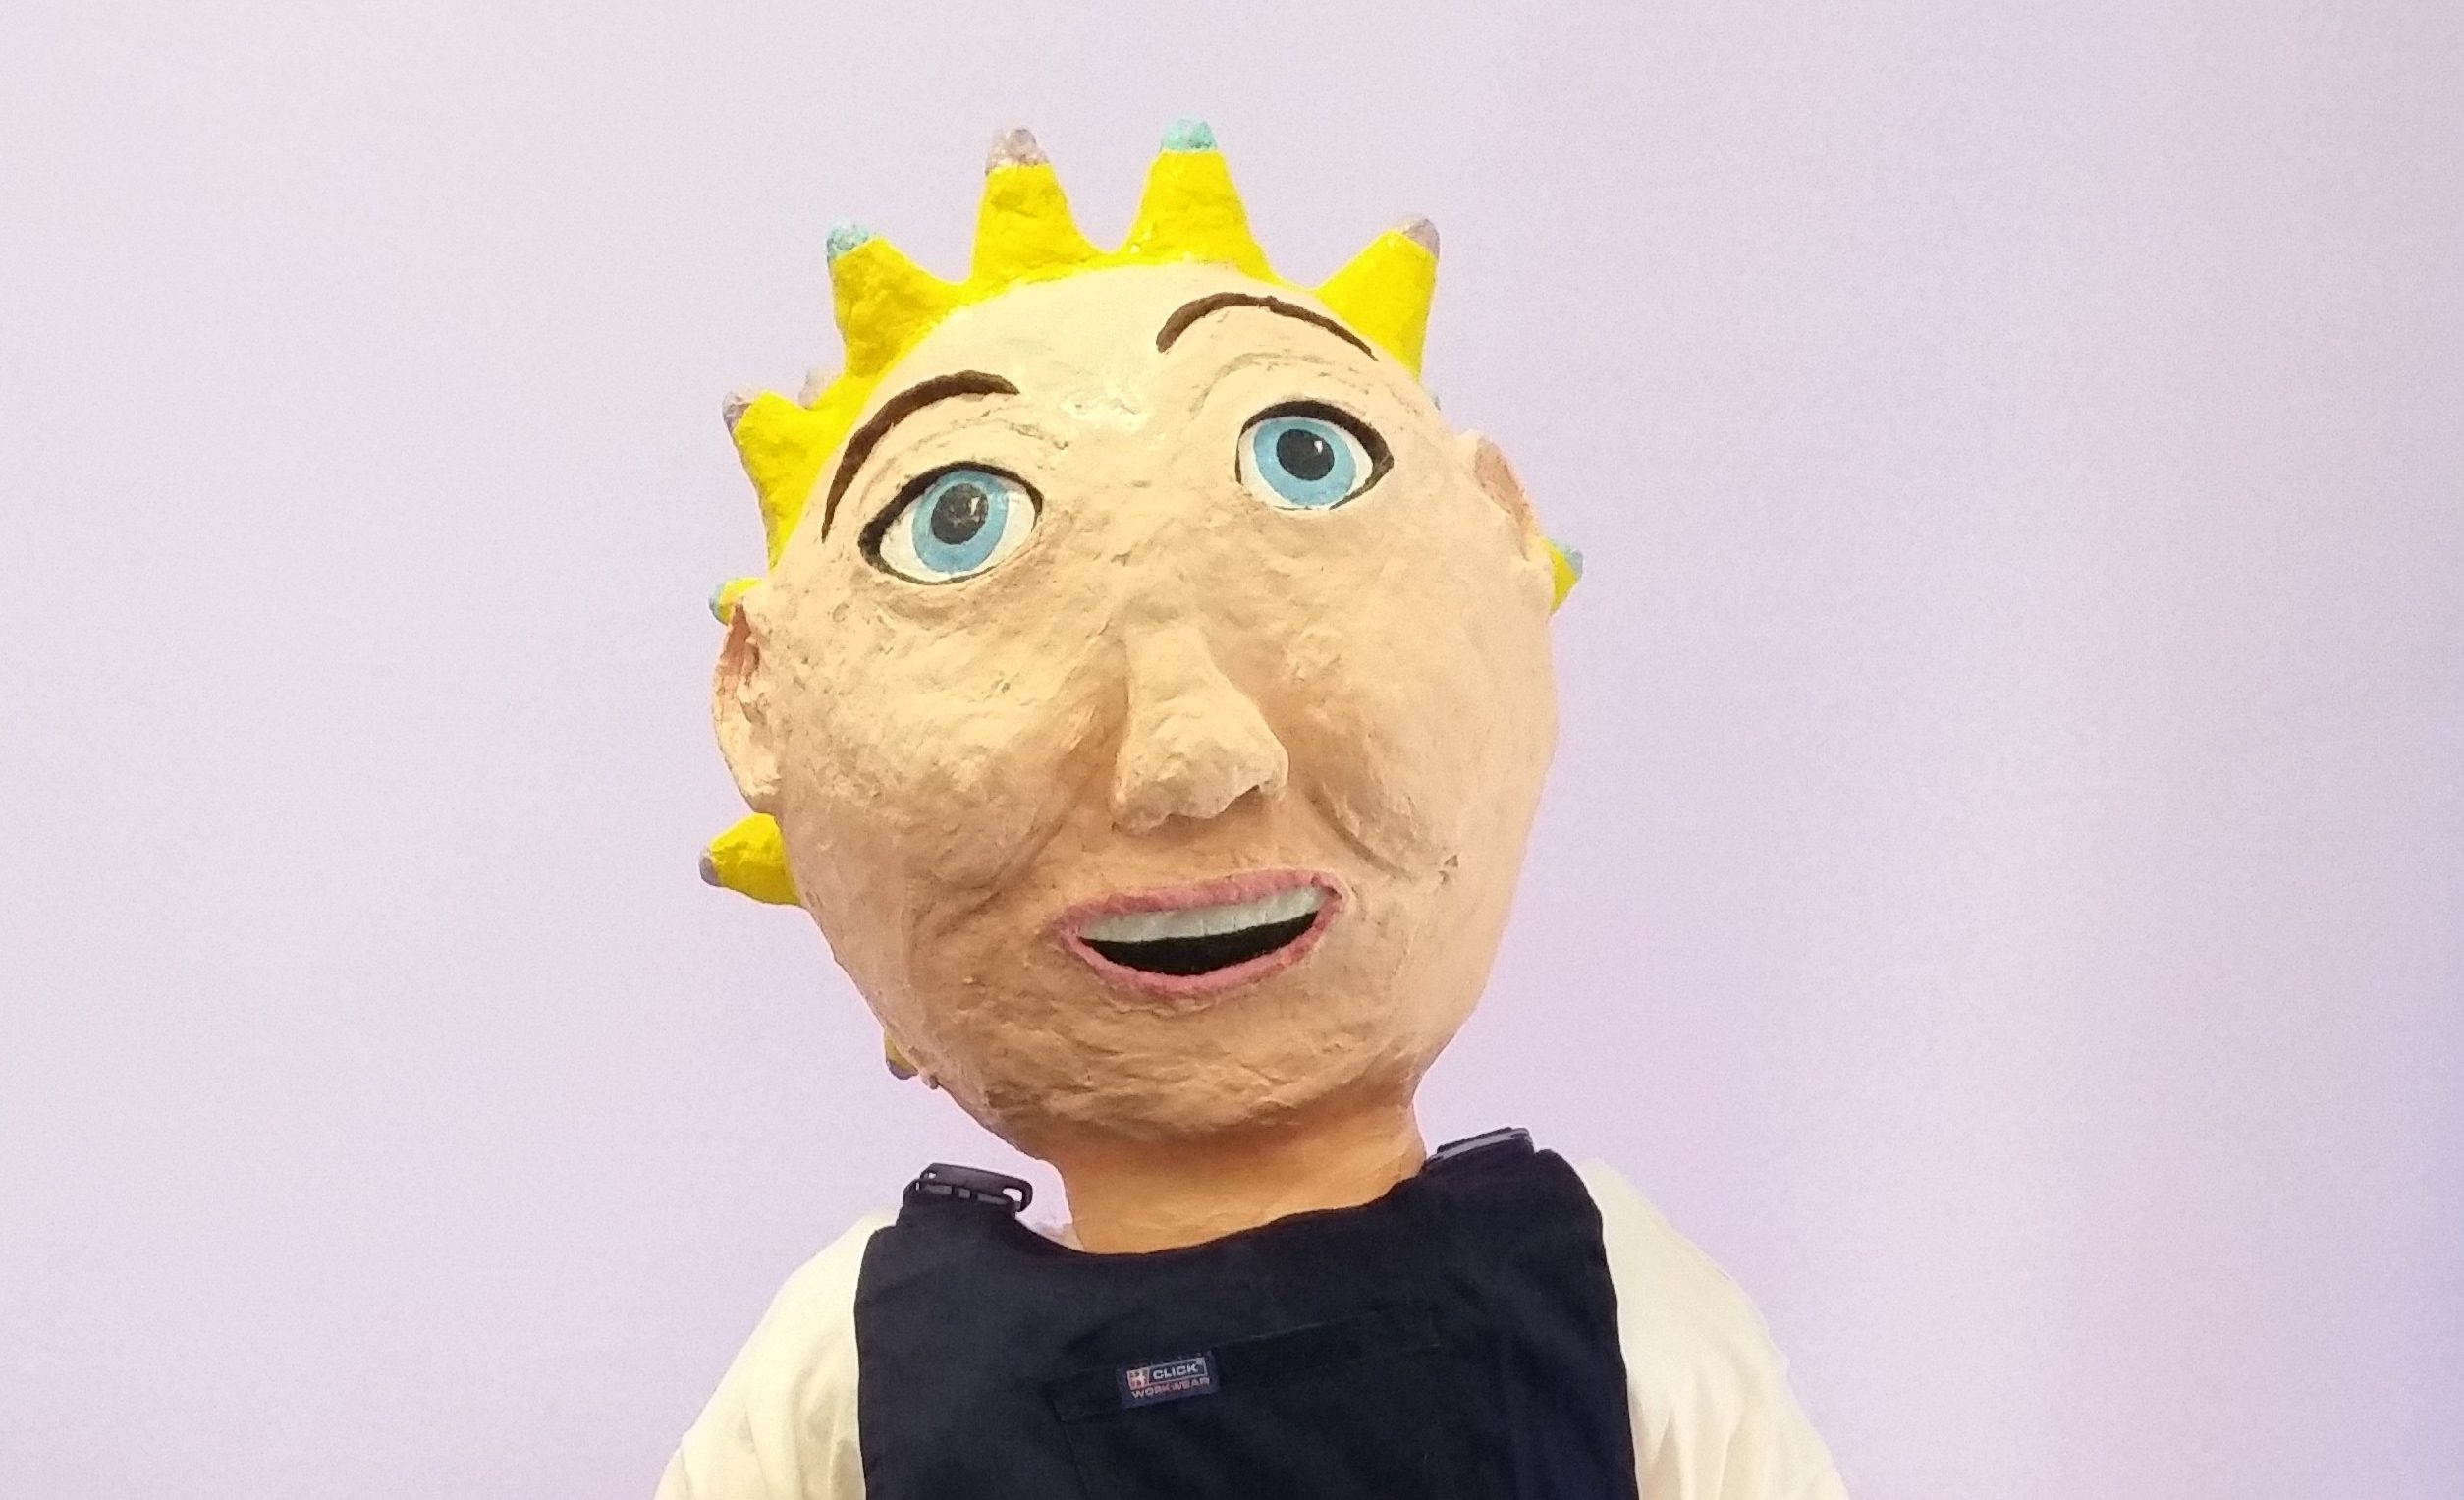 The Oor Wullie sculpture made by Capability Scotland service users.